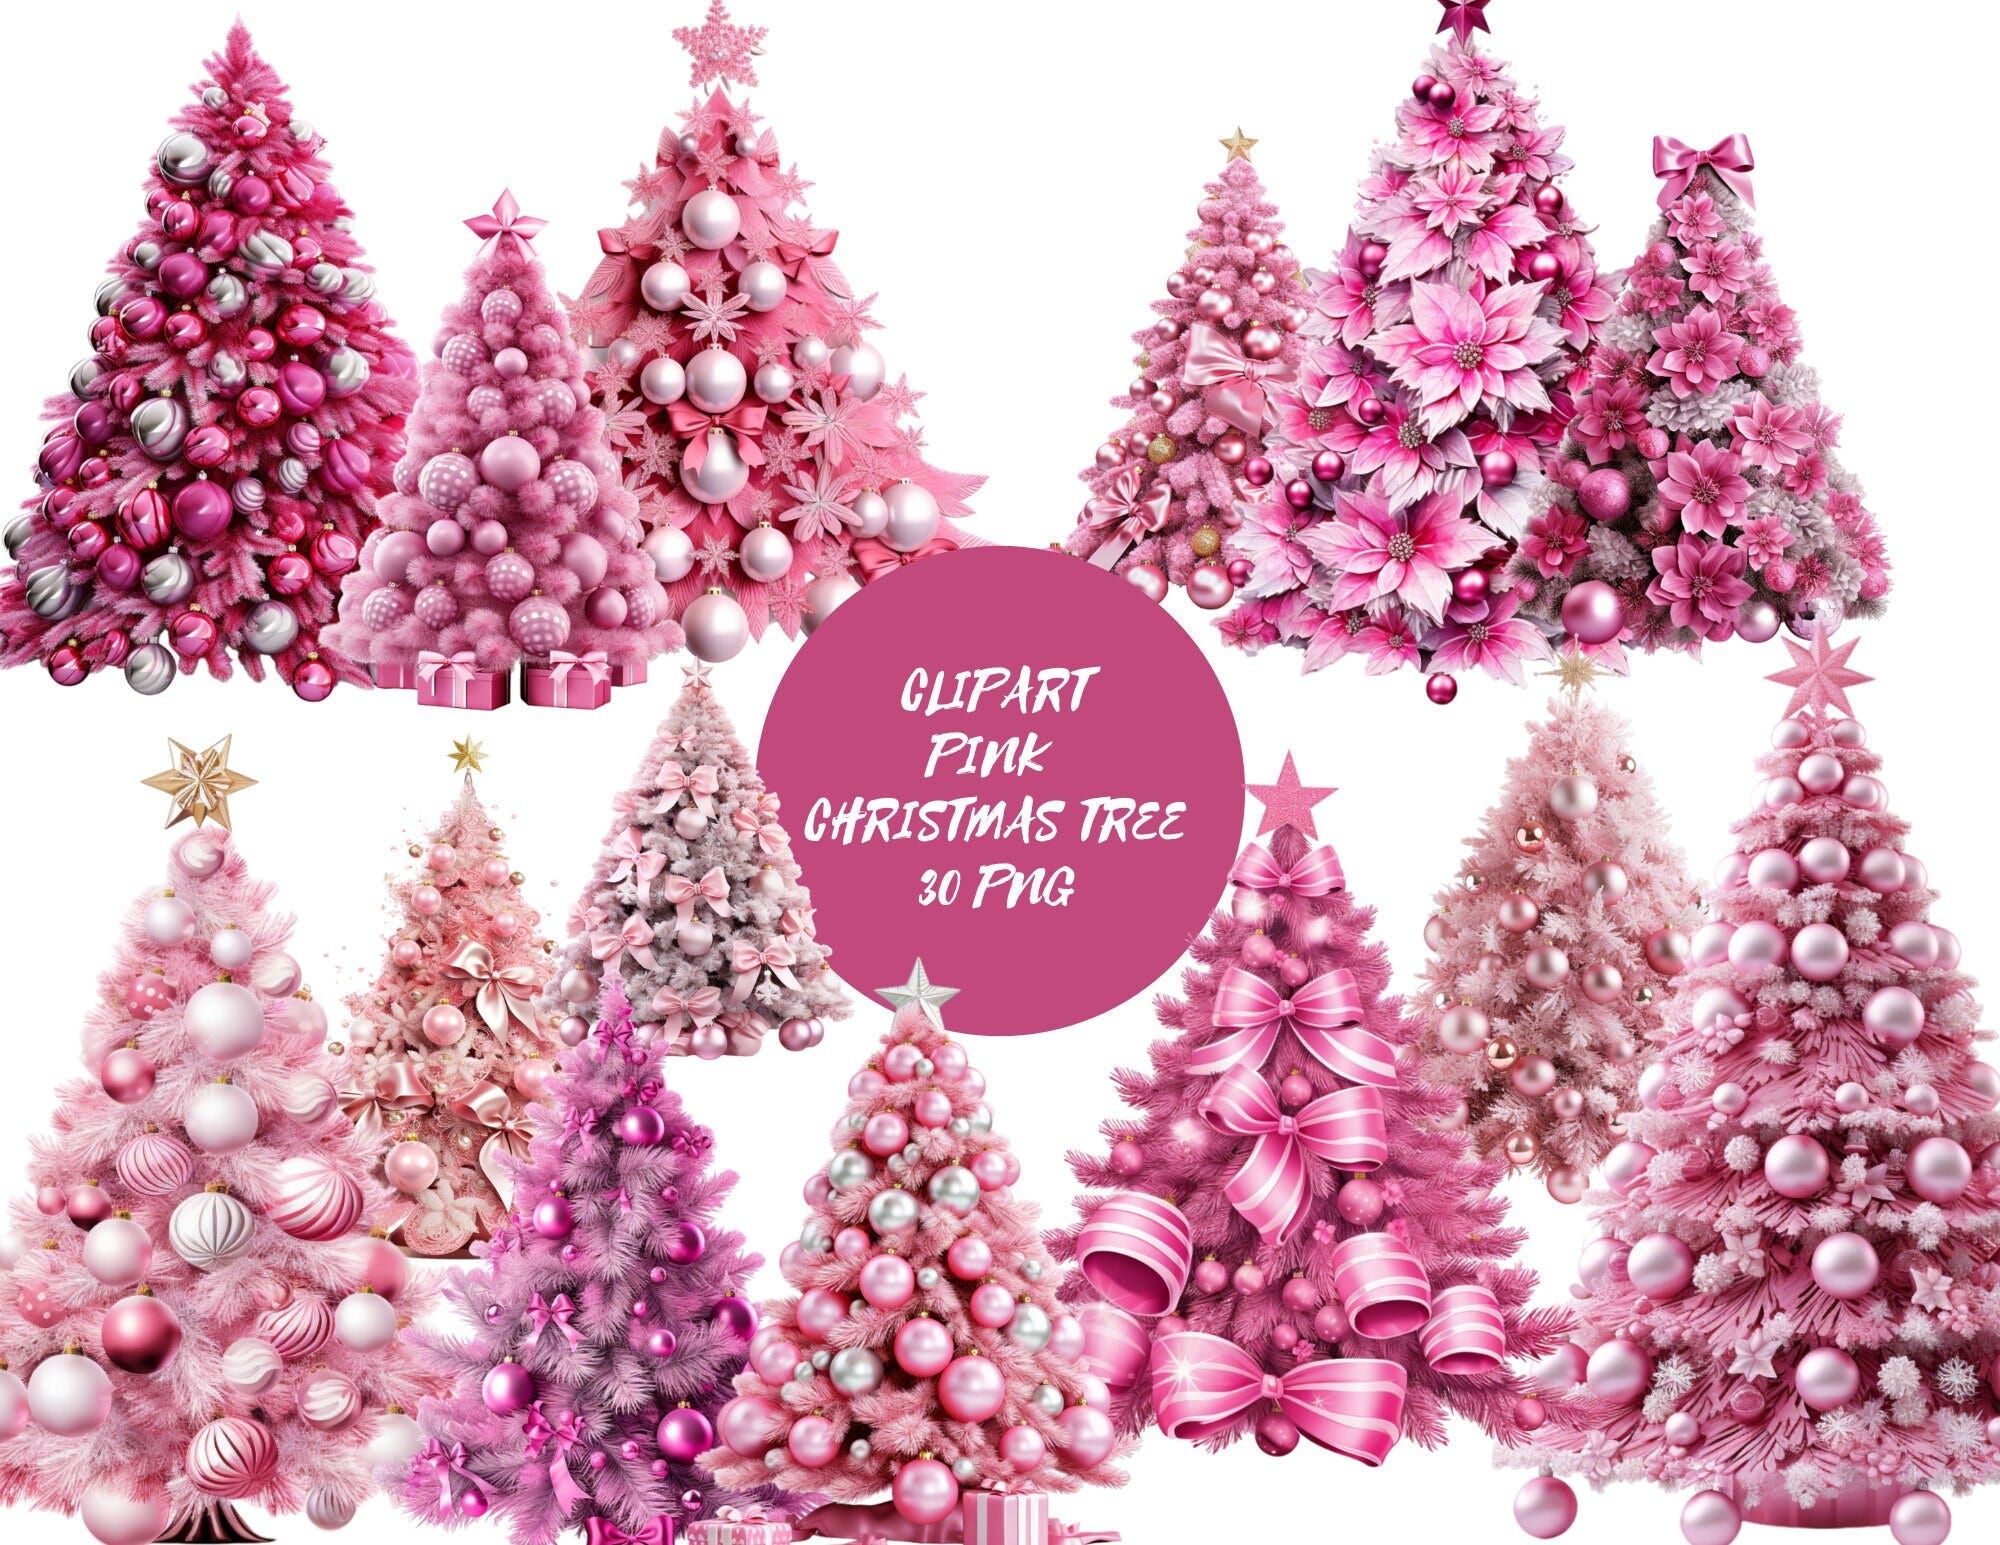 Clipart Pink Christmas Trees Clipart, PNG digital files on a transparent background, scrapbook, invitations, commercial use